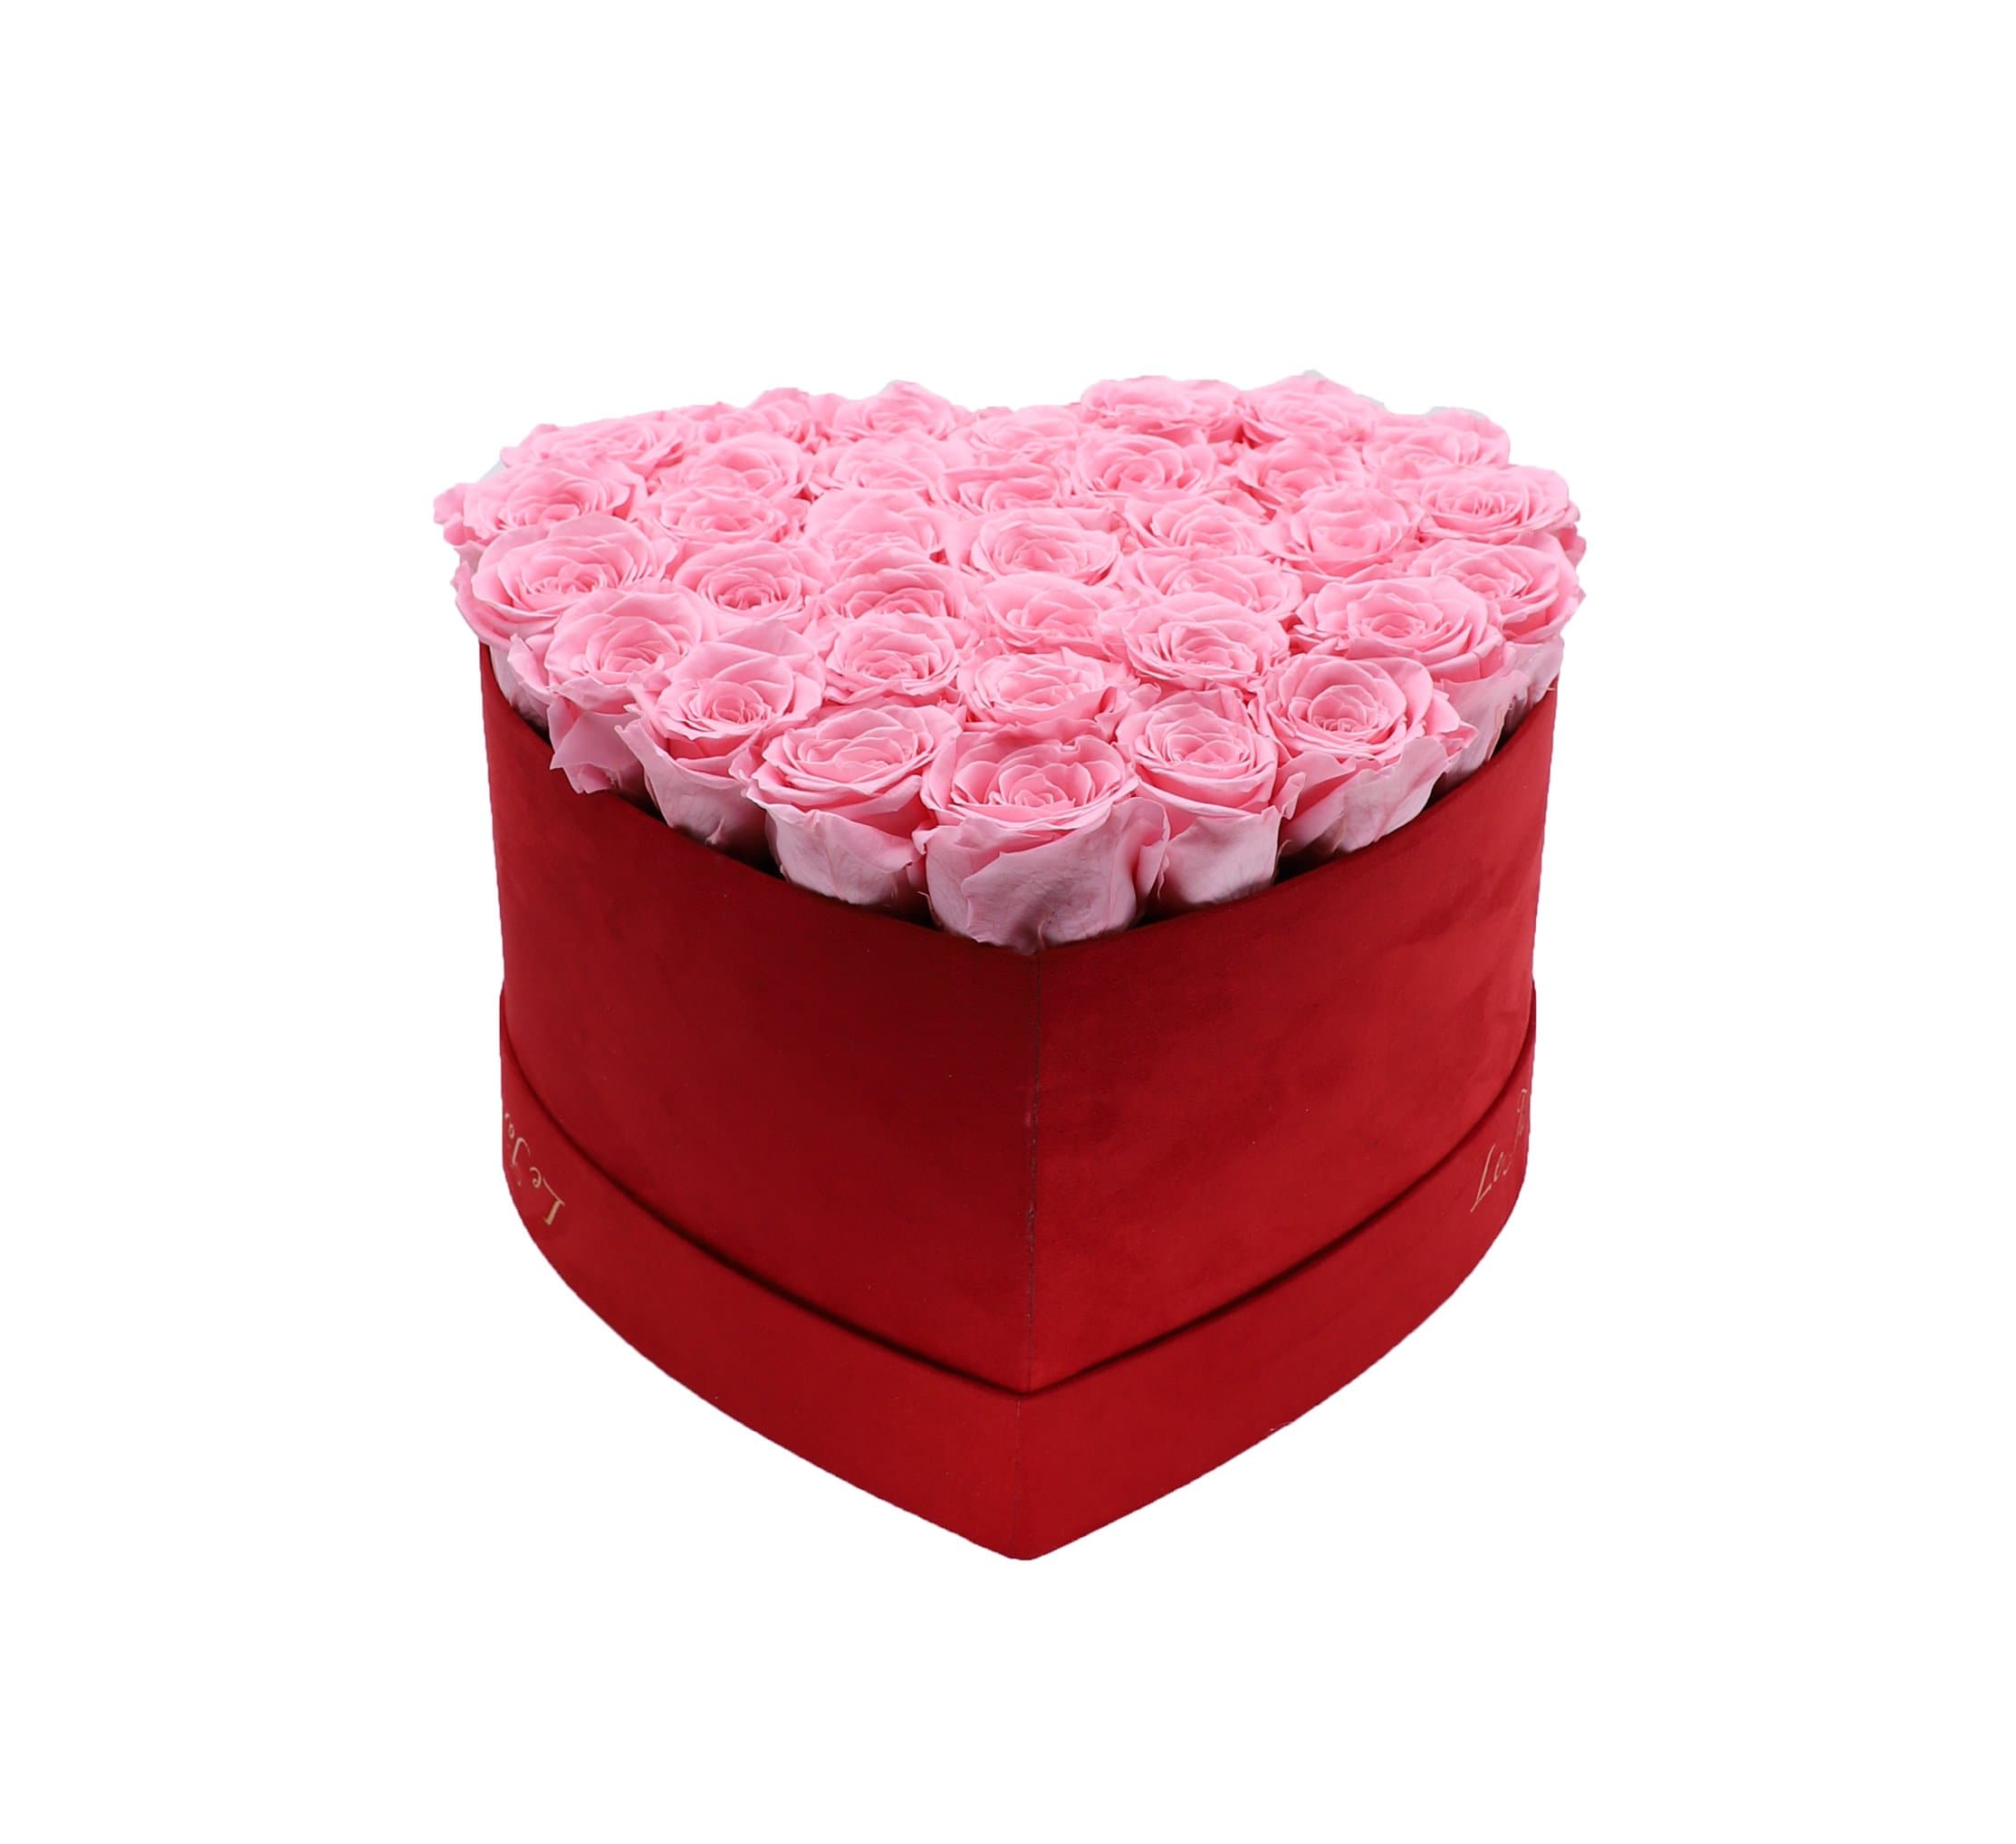 36 Pink Preserved Roses in A Heart Shaped Box- Small Heart Luxury Red Suede Box